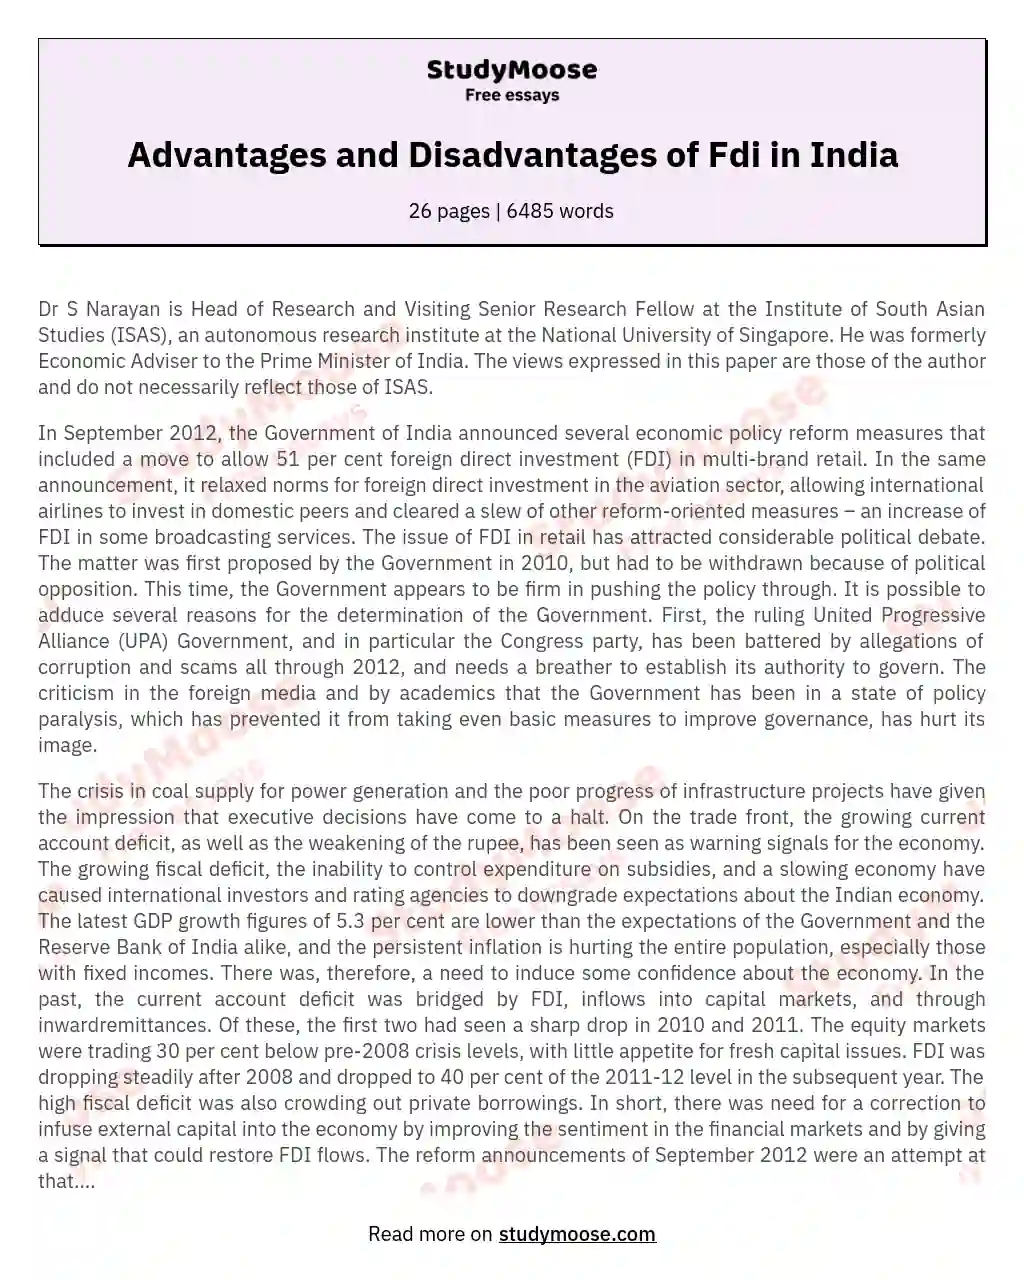 Advantages and Disadvantages of Fdi in India essay